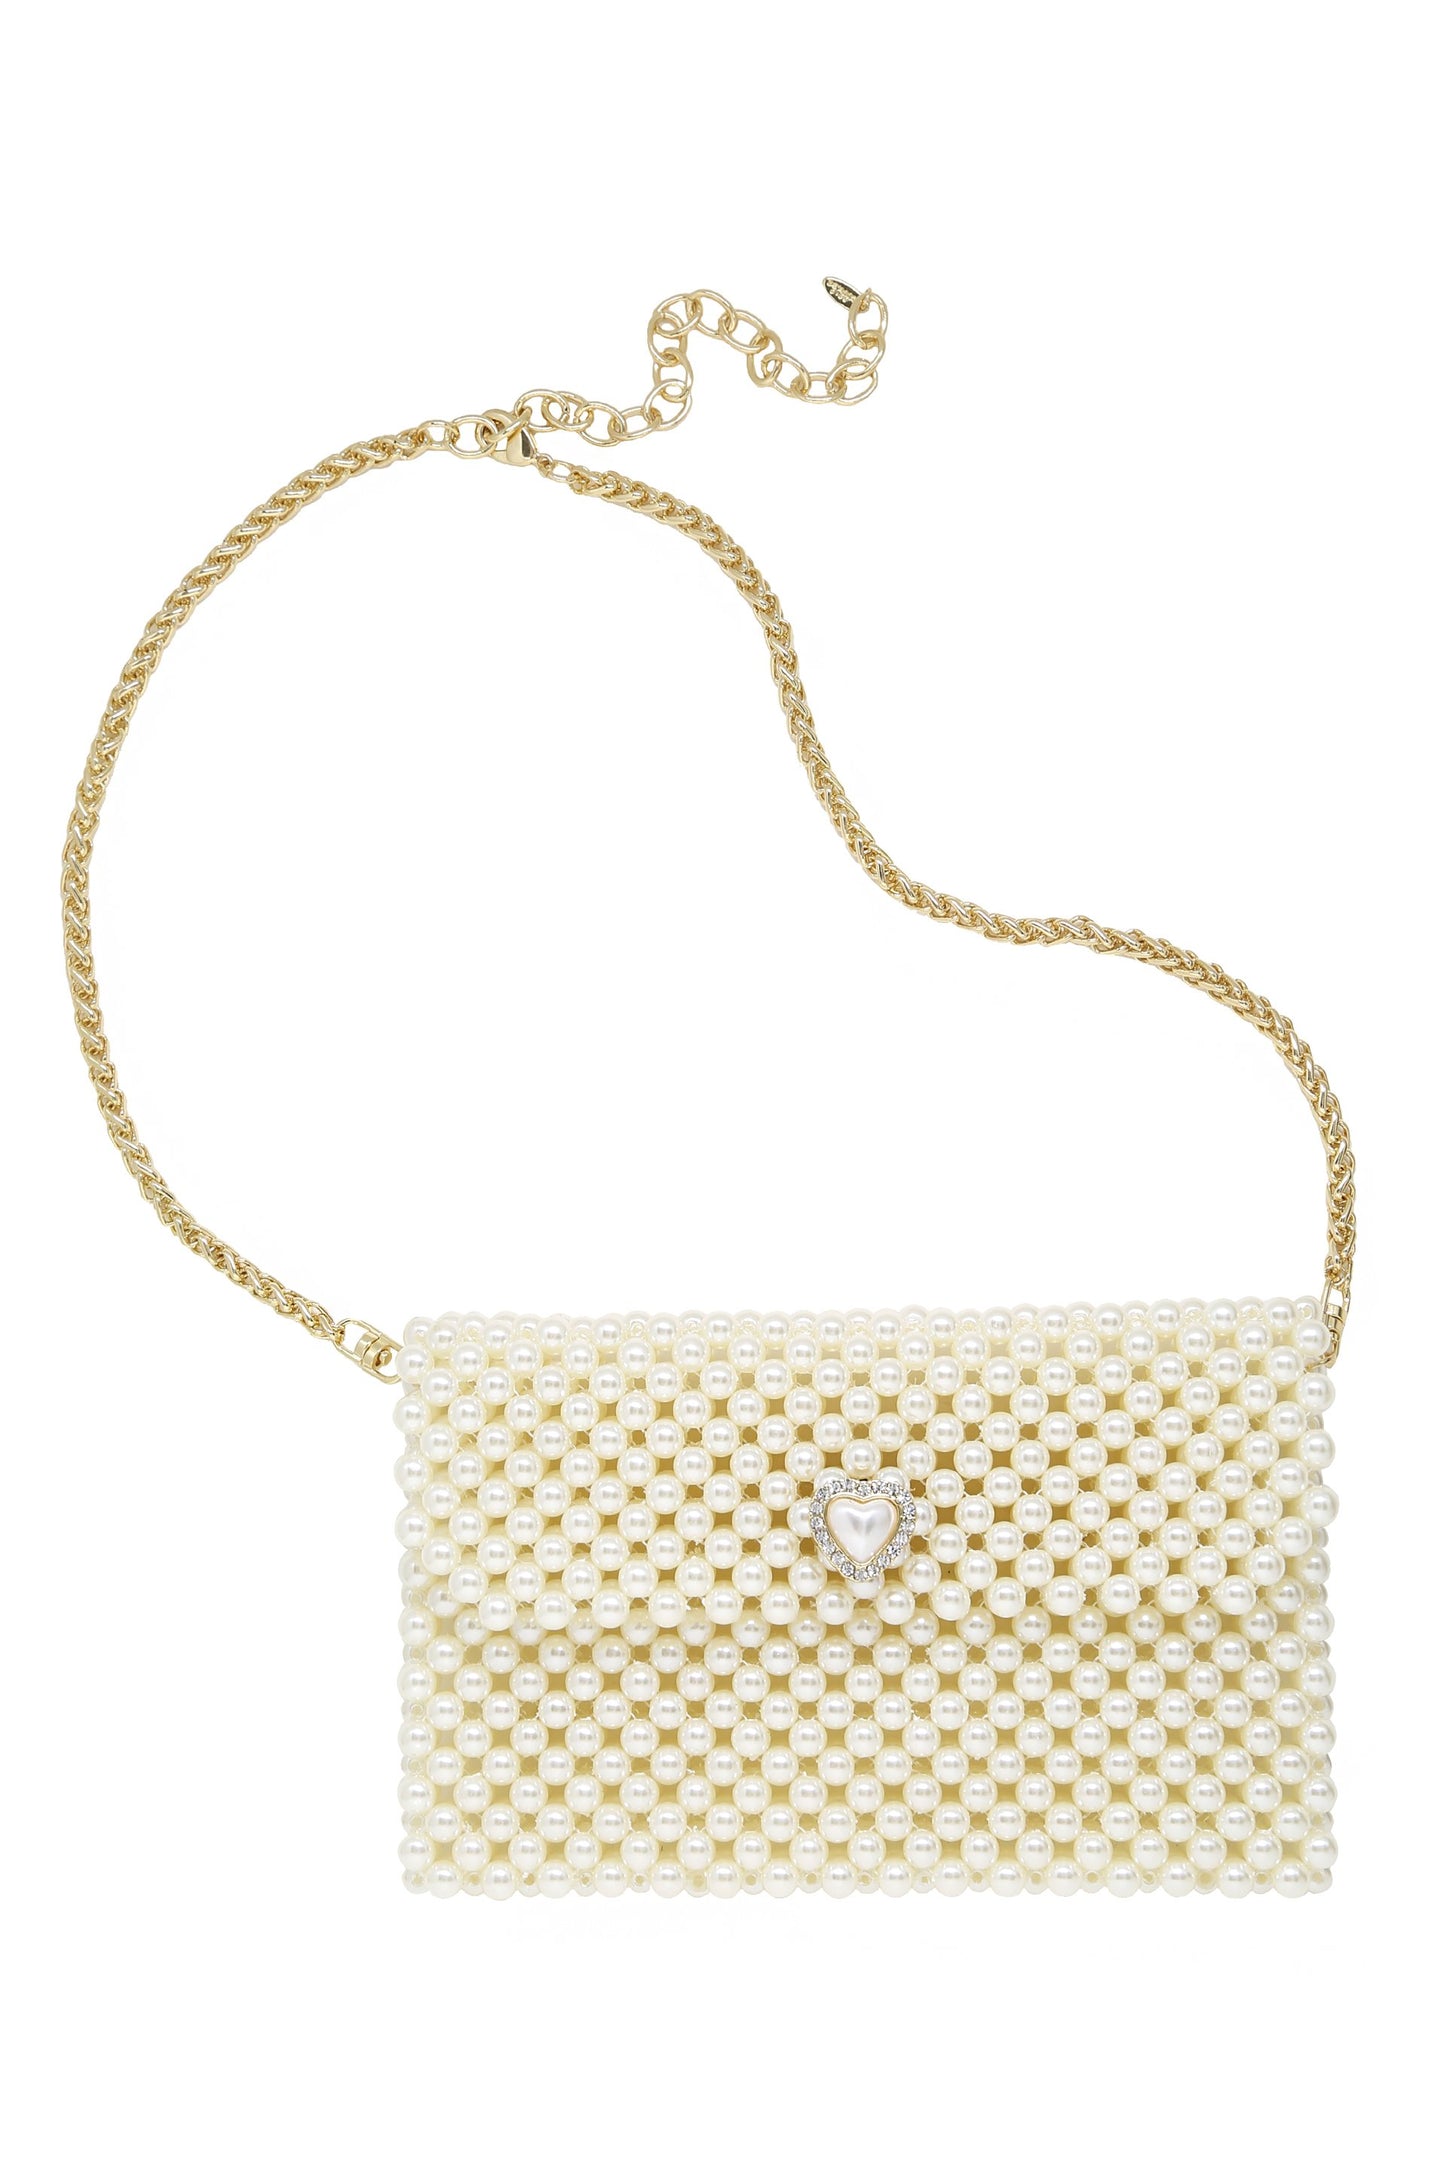 Pearl Waist Bag with Heart Closure on white background  